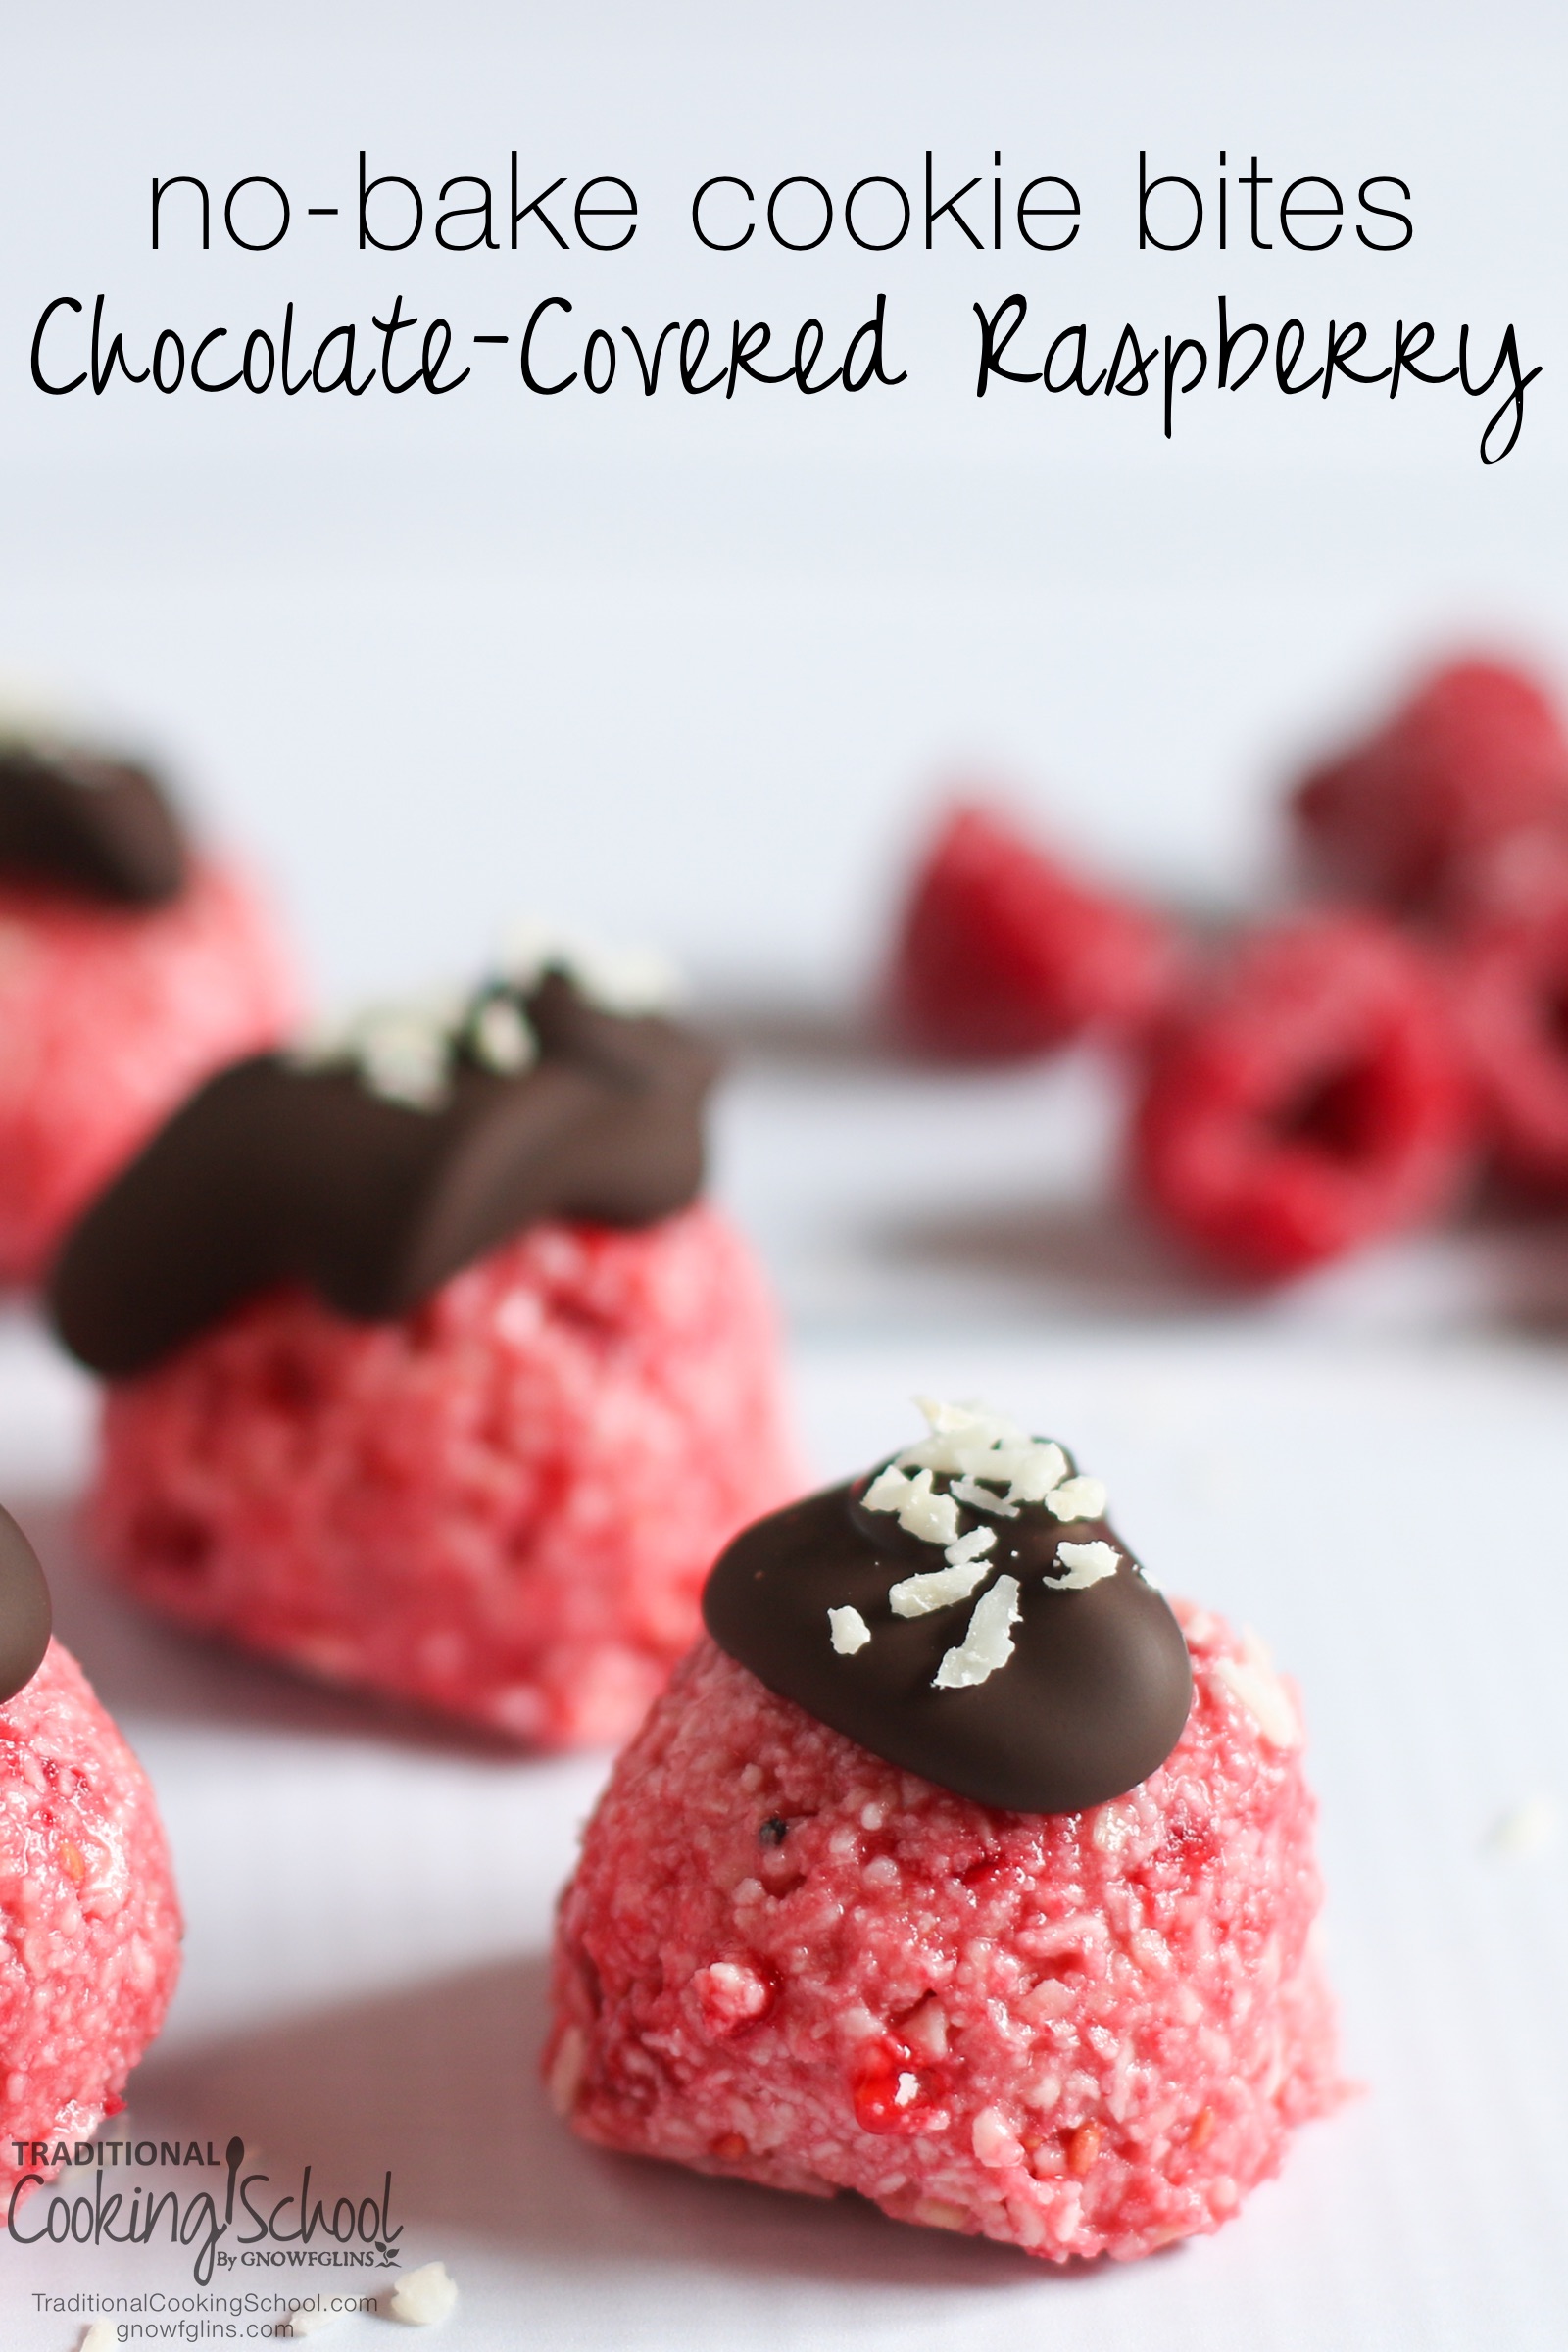 Chocolate-Covered Raspberry No-Bake Cookie Bites | No bake? Check. So easy a kid could do it? Check. Healthy, real food ingredients? Check. Allergy-friendly? Check. Only one appliance? Check. Just a couple dirty dishes? Check. Delicious? That, too! I've been so excited to bring you this recipe! | TraditionalCookingSchool.com